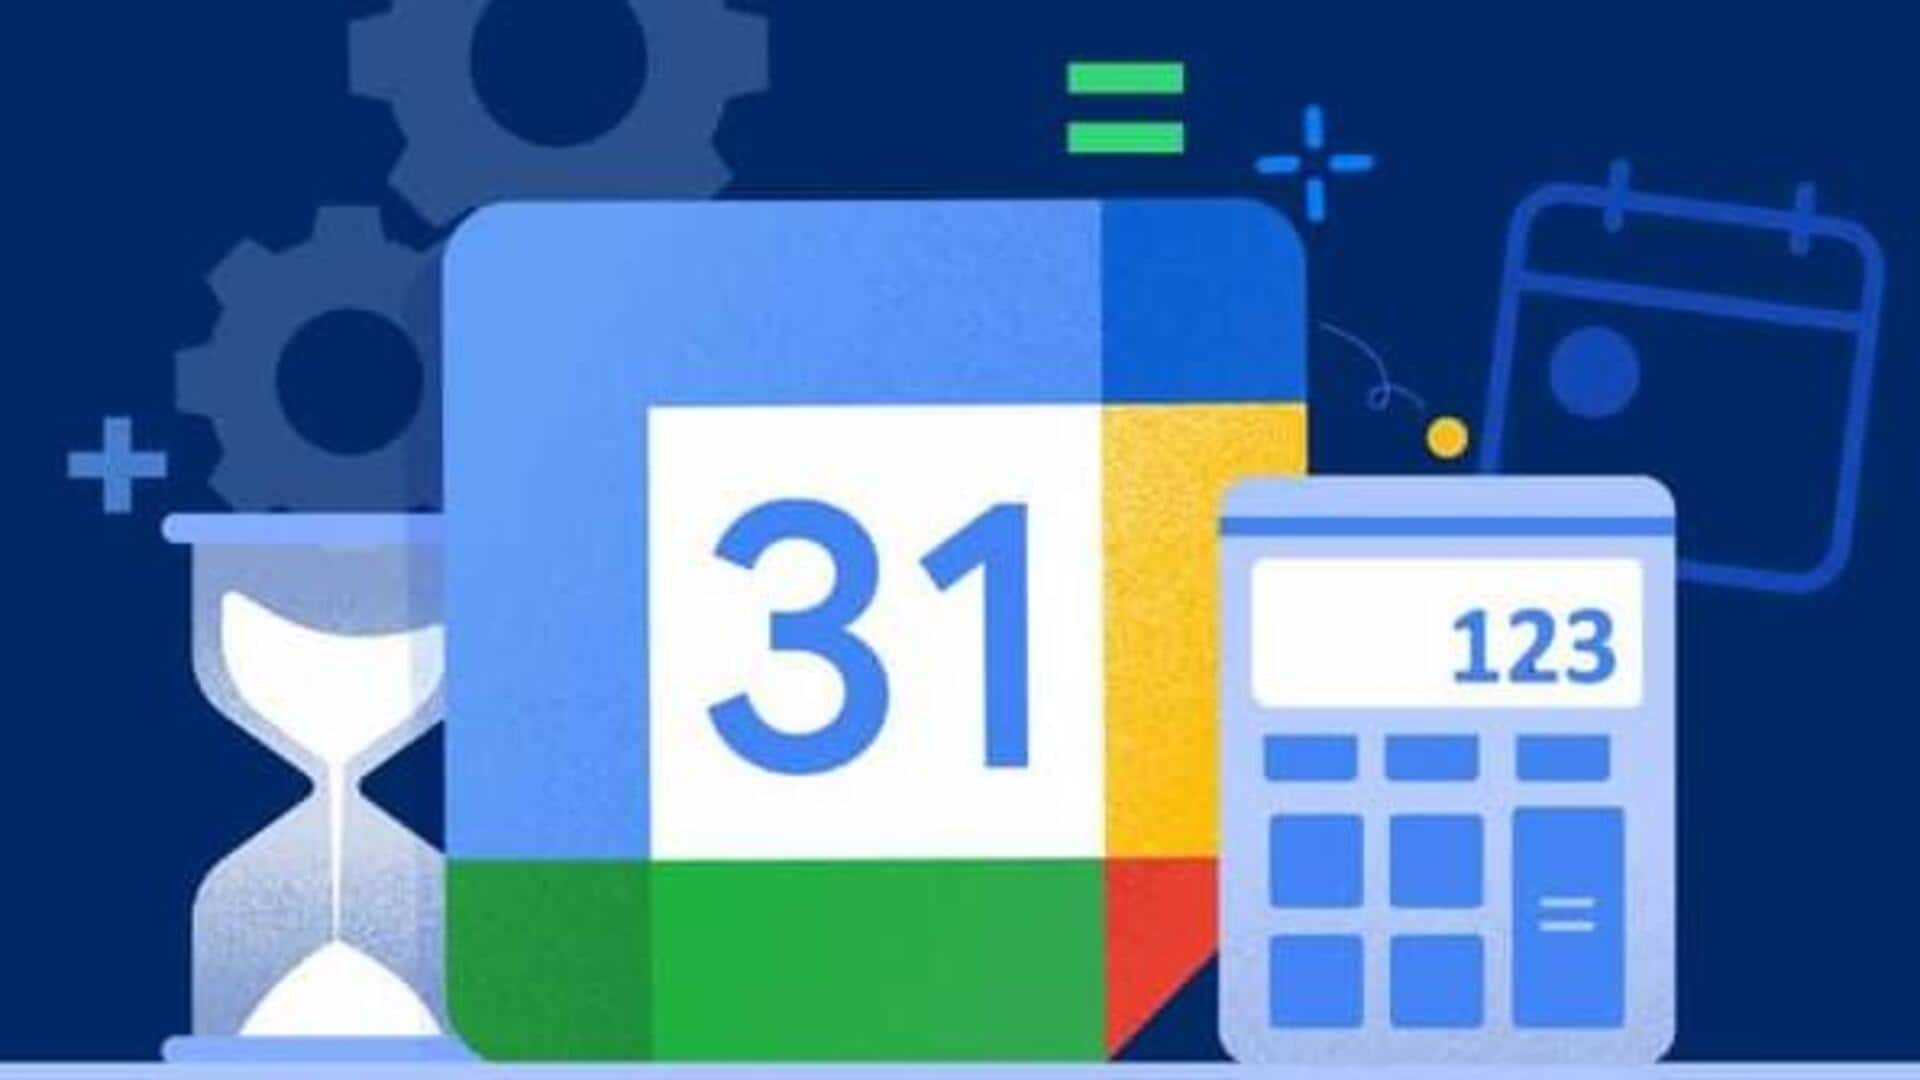 Google Calendar will now show live date within app screen